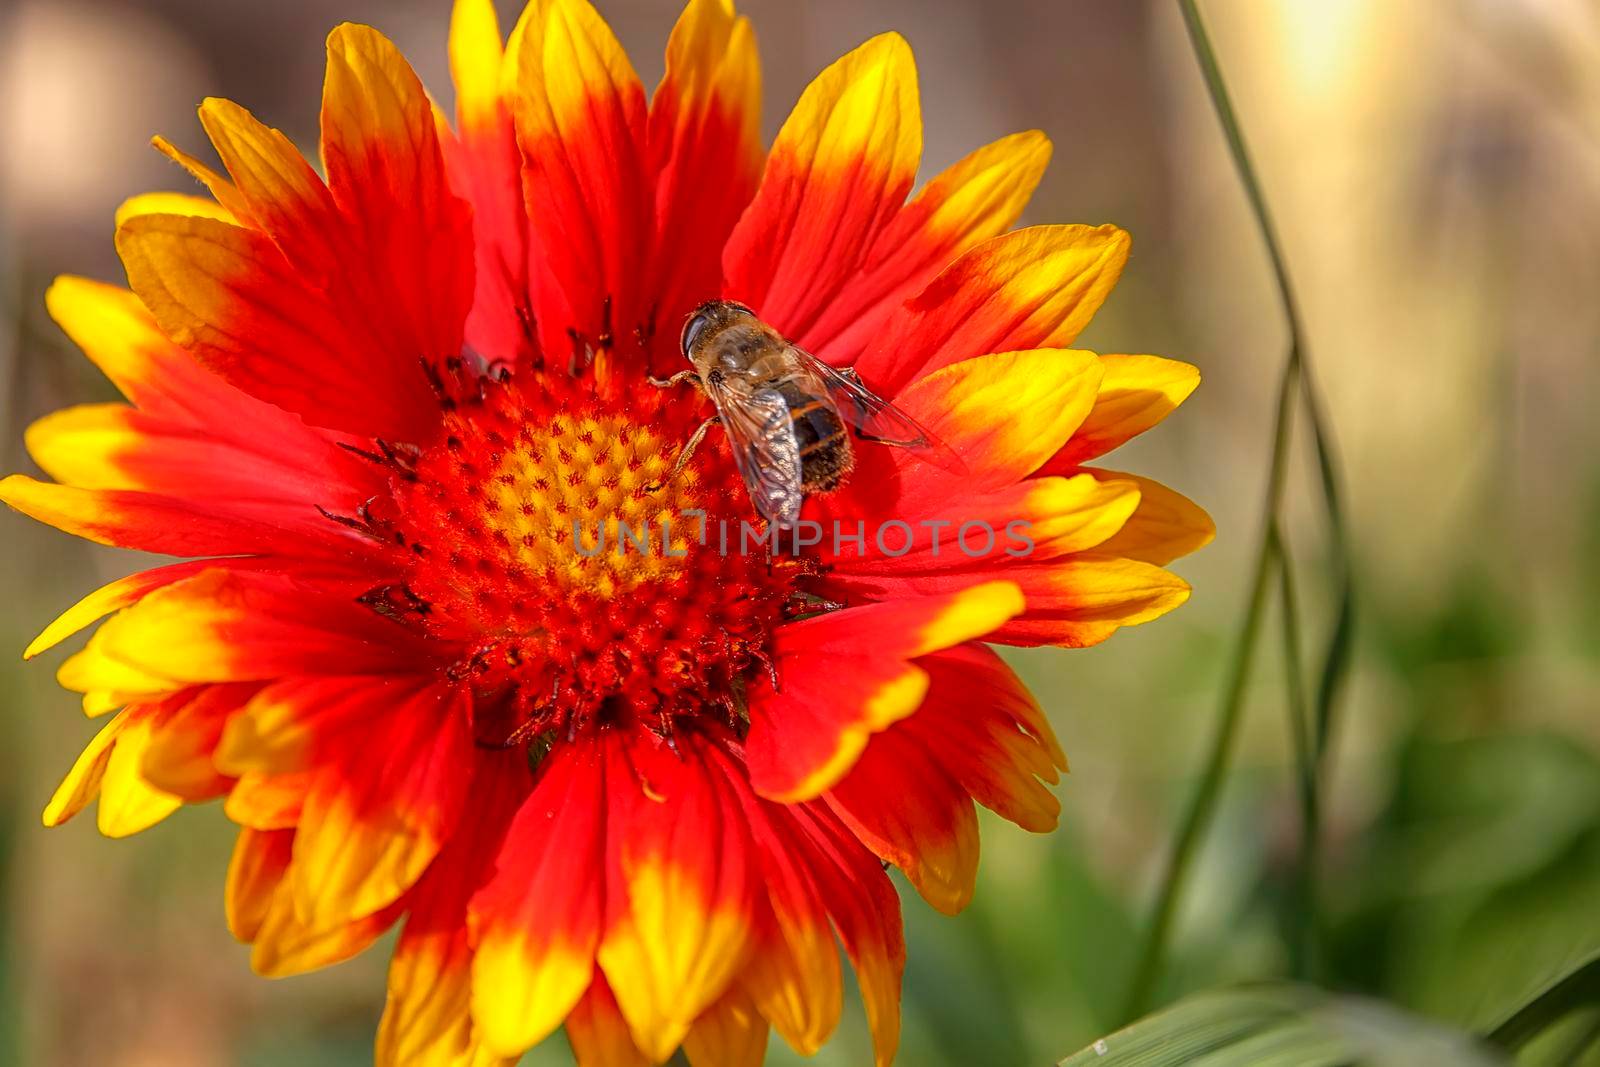 Springtime. Colorful close-up of a honey bee pollinating a bright red flower.